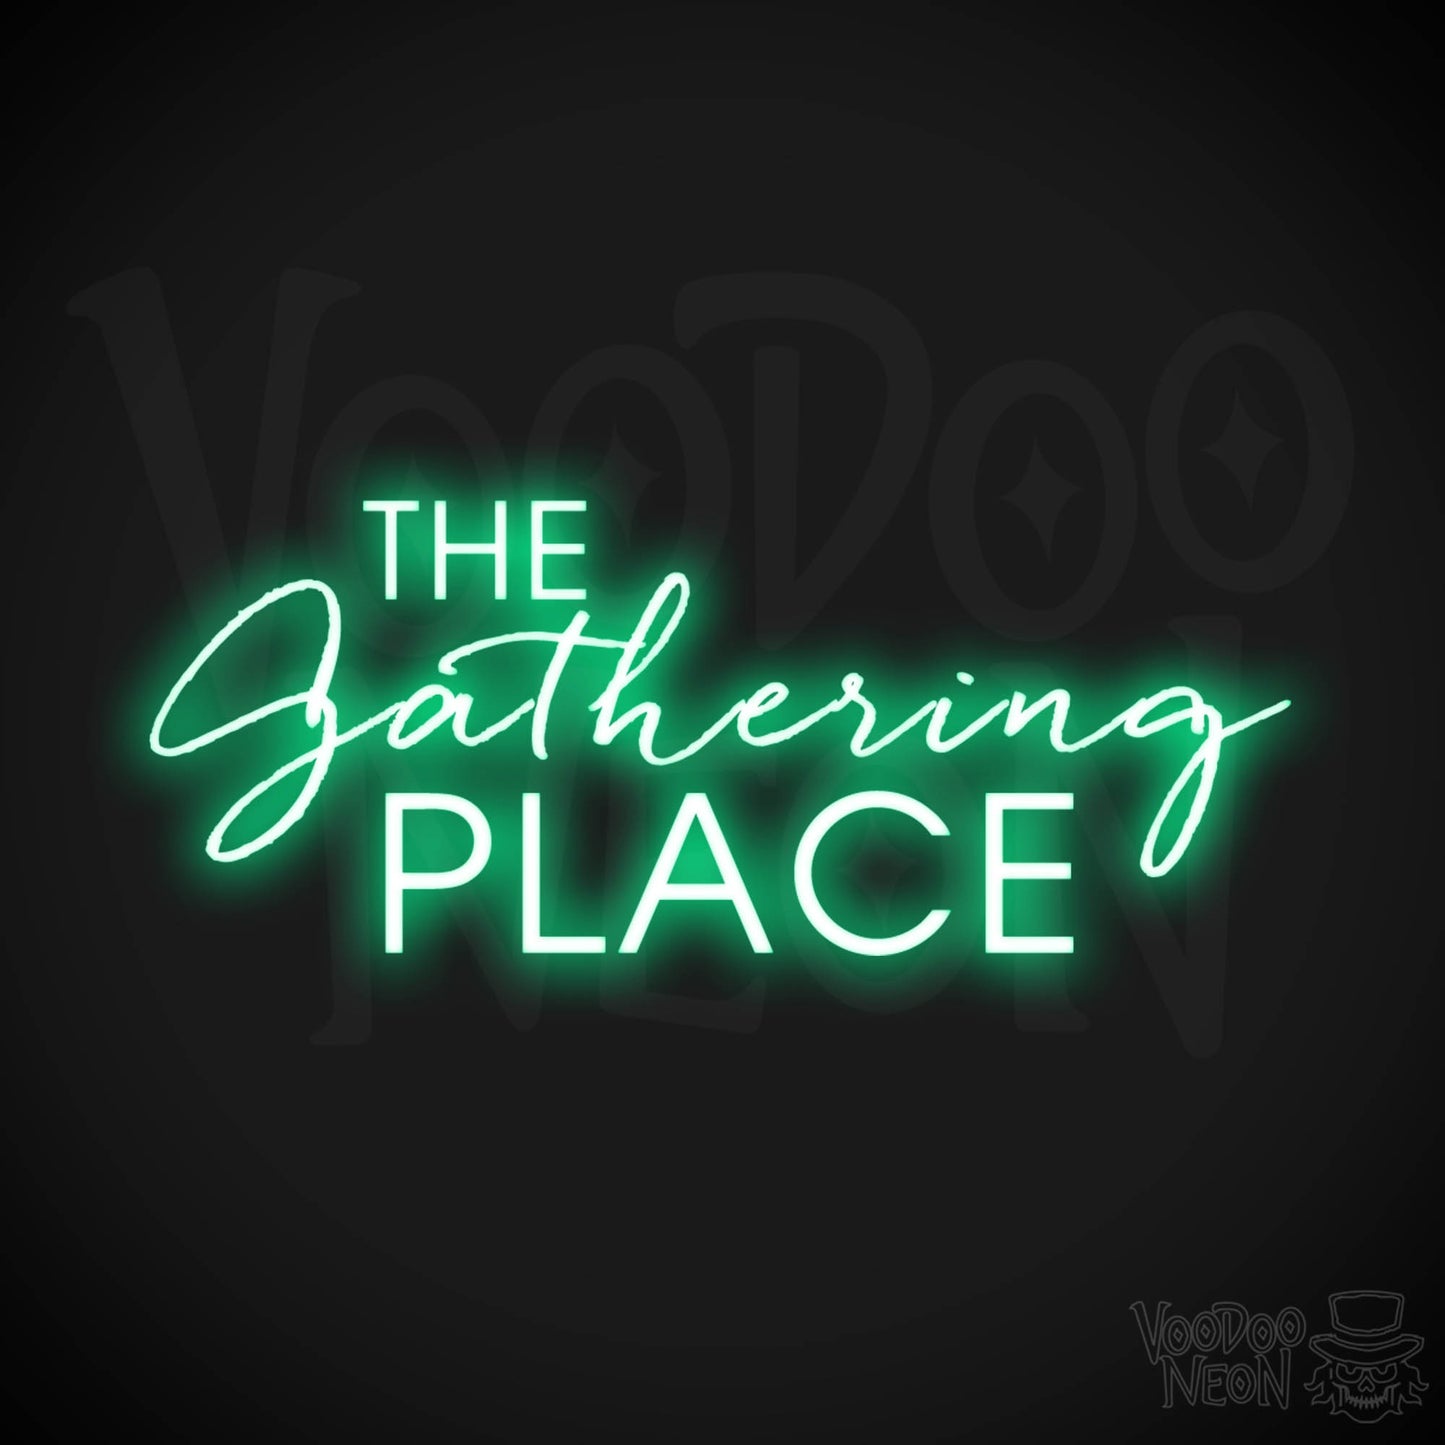 The Gathering Place Neon Sign - Neon The Gathering Place Sign - Wall Art - Color Green